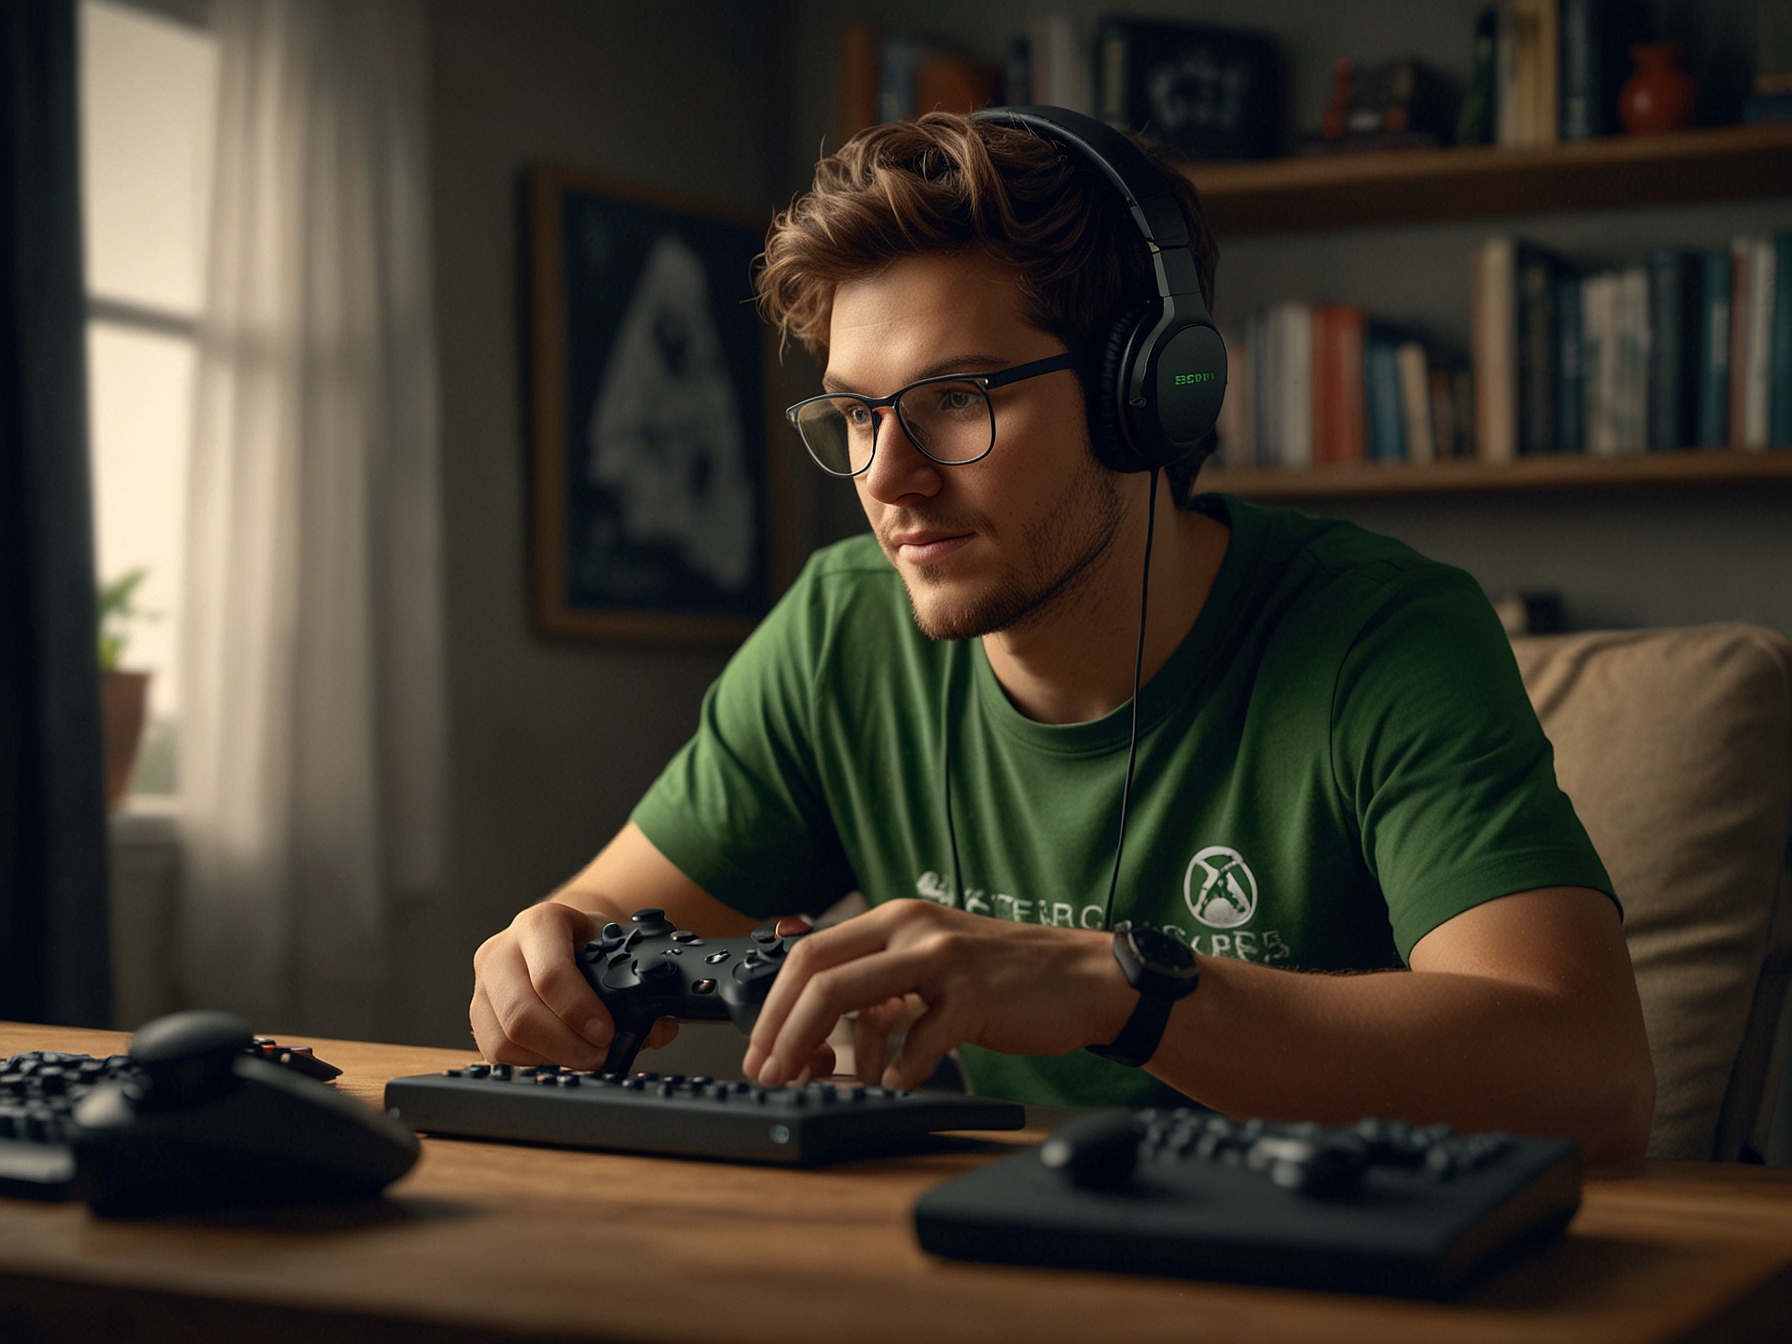 A gamer playing Xbox games on multiple devices, illustrating the versatile benefits of Xbox Game Pass Ultimate, including PC, console, and mobile cloud gaming options.